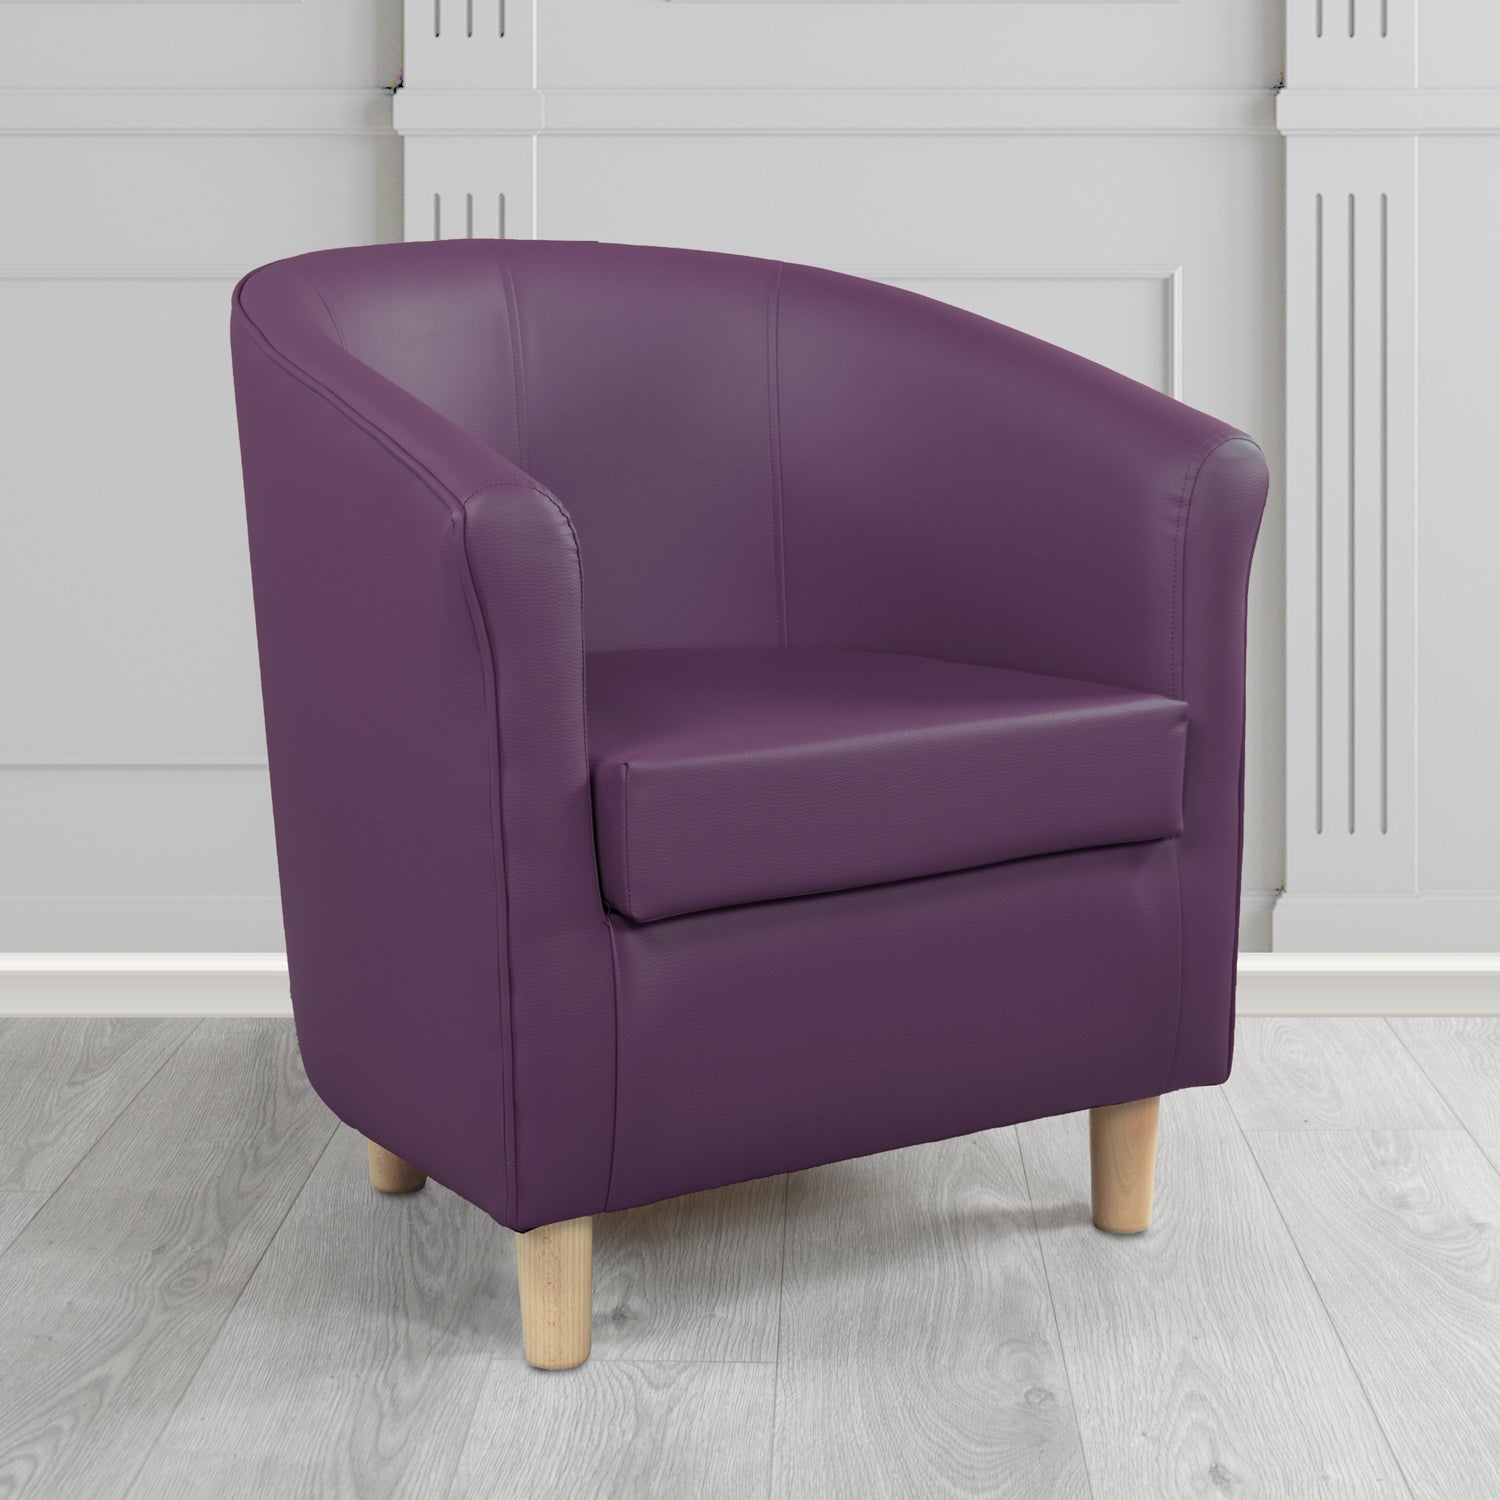 Tuscany Just Colour Damson Antimicrobial Crib 5 Contract Faux Leather Tub Chair - The Tub Chair Shop